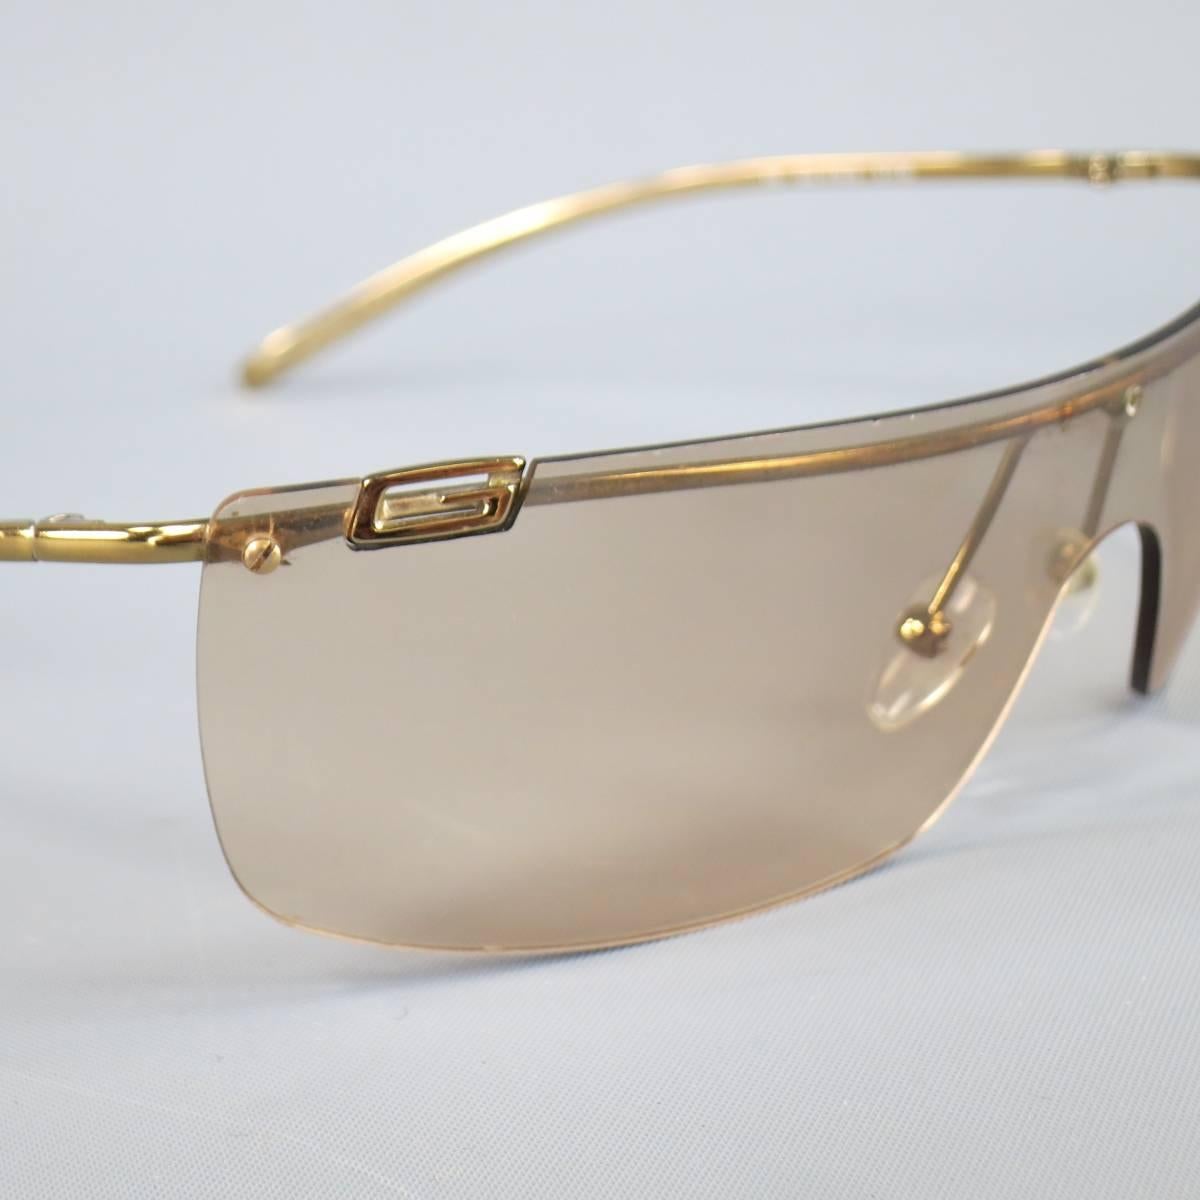 These retro inspired GUCCI sunglasses feature an angular rose gold gradient shield lens with skinny gold  arms and G logo. Minor Scratches on lens. As-Is. Made in Italy.
 
Fair Pre-Owned Condition.
Marked: 115 GG 17/19/S 57716
 
99 mm x 3 mm x 115 mm